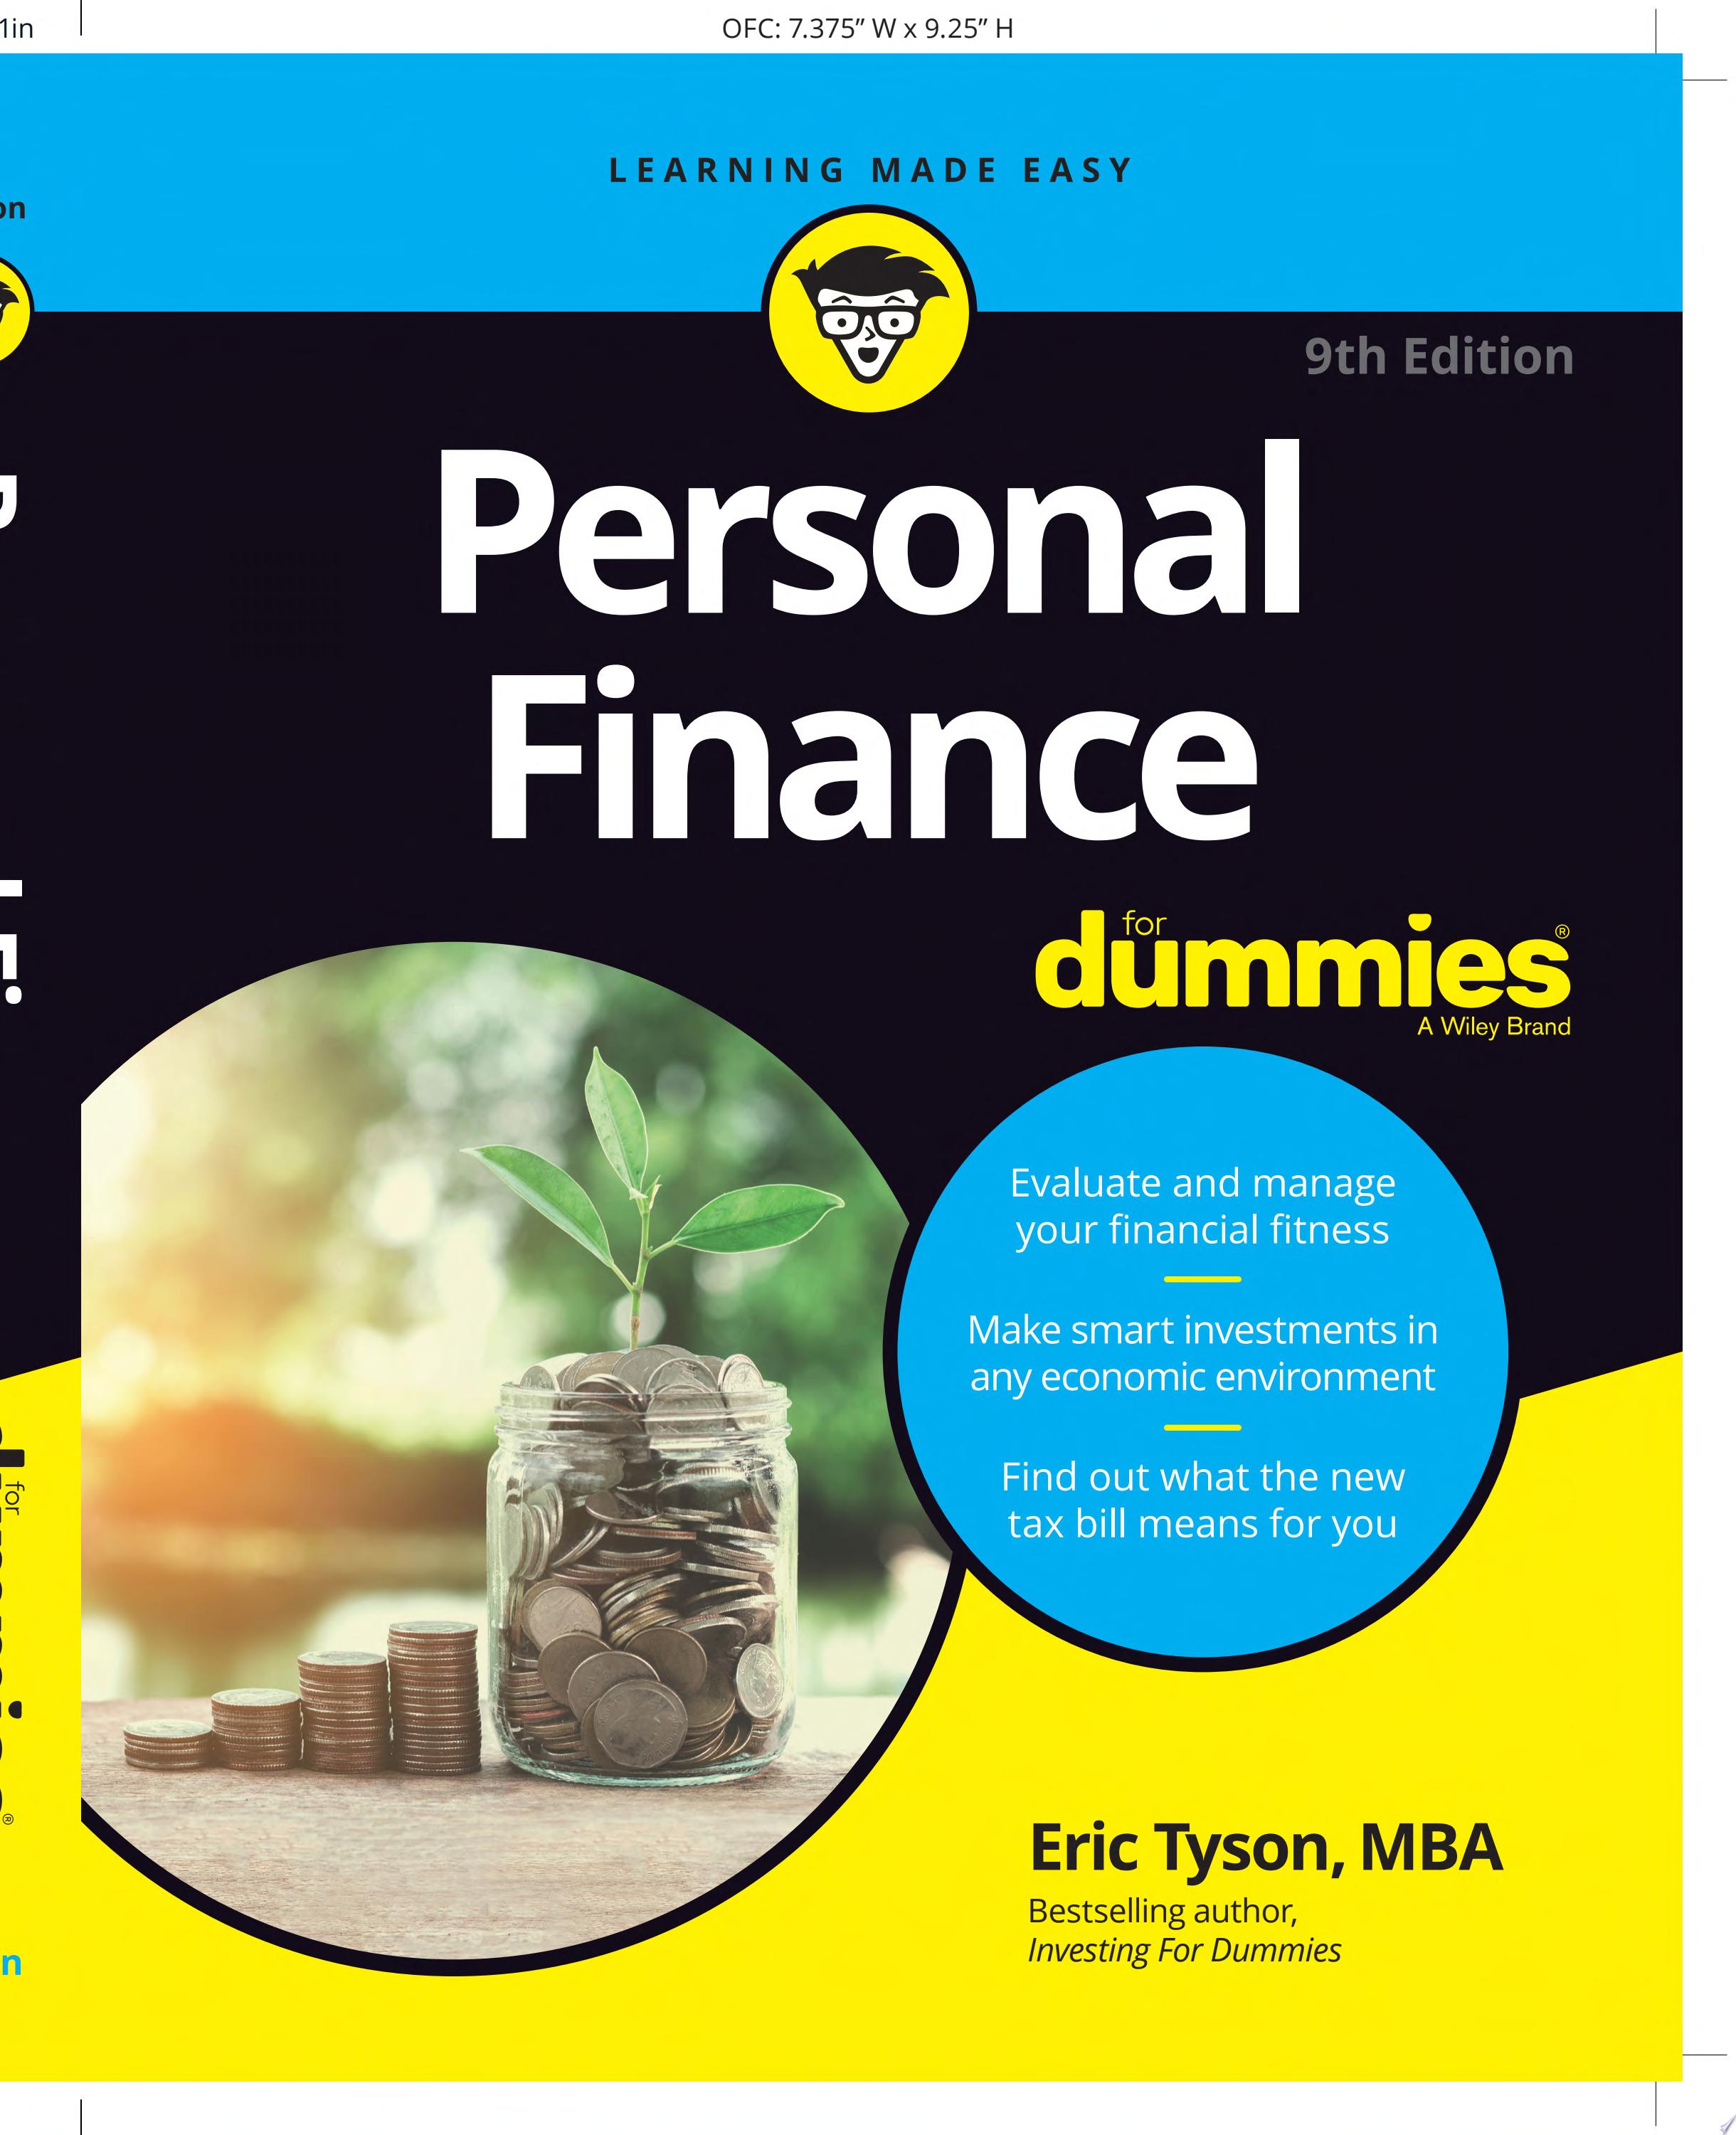 Image for "Personal Finance For Dummies"